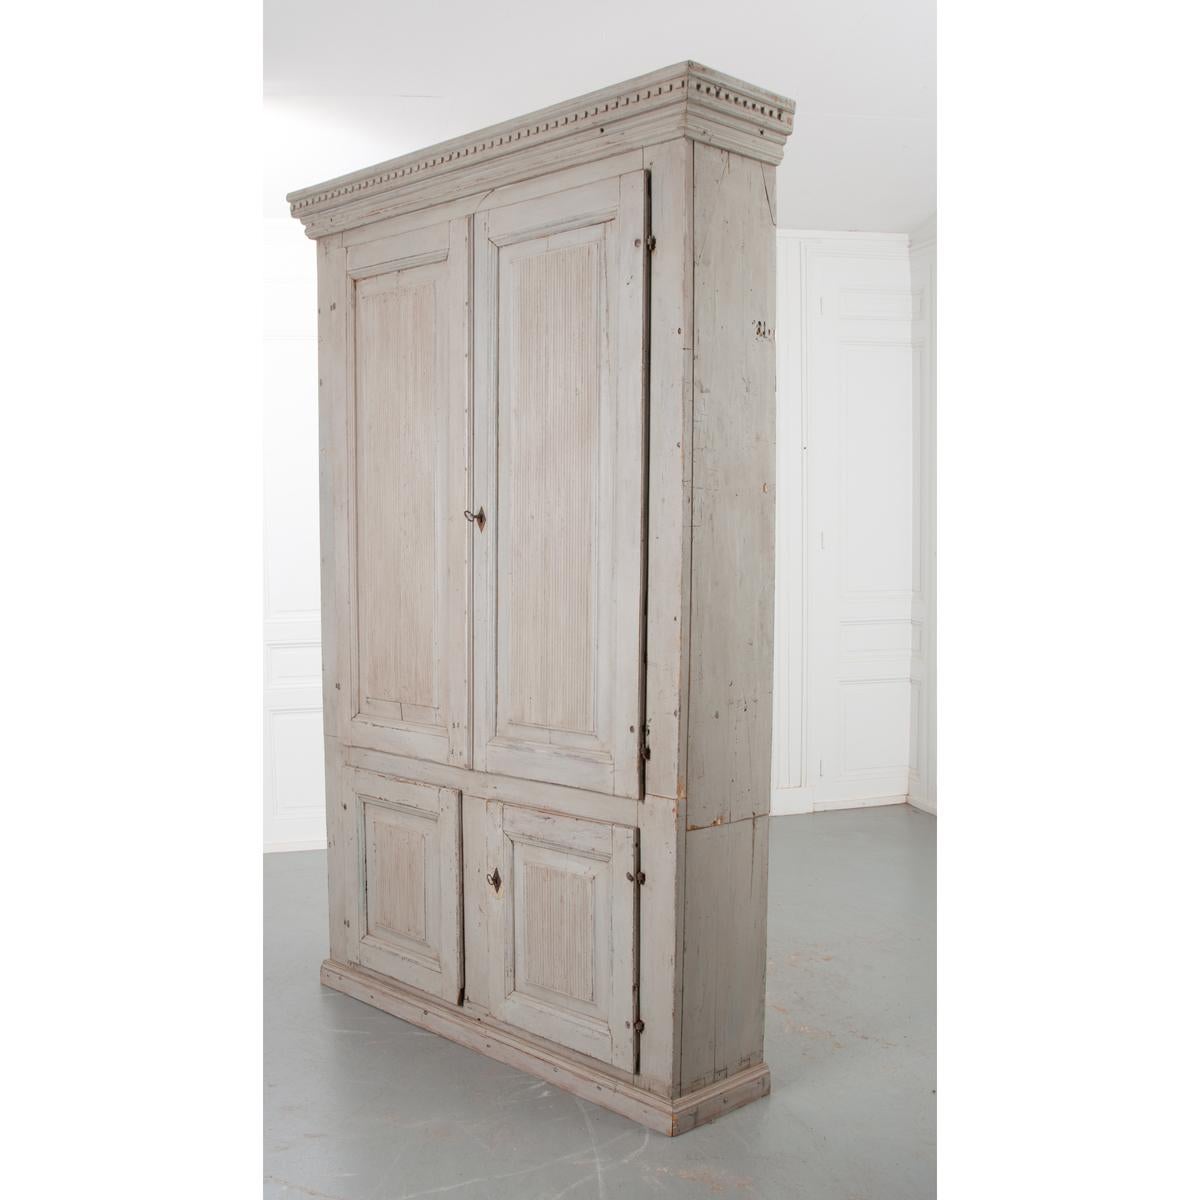 This is a massive cabinet from 18th century Sweden, circa 1780. A wonderful patina covers the whole, still sporting its original light blue paint. Deeply carved squares protrude from the cornice perimeter. All four door panels feature ribbed carving